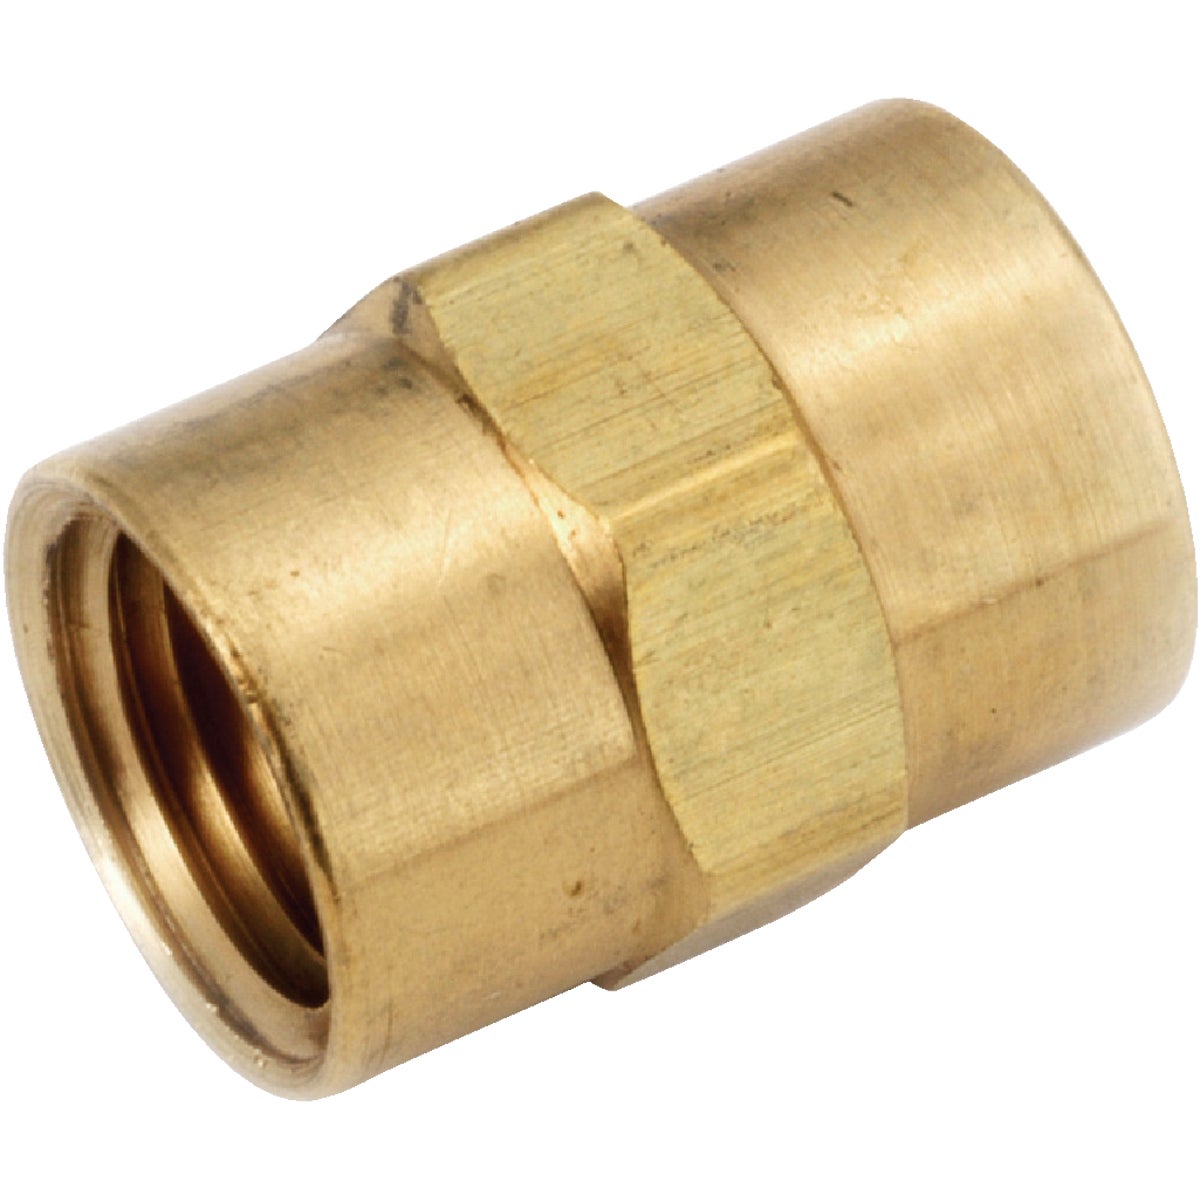 Item 400192, F.I.P. (Female iron pipe) thread yellow brass pipe coupling.